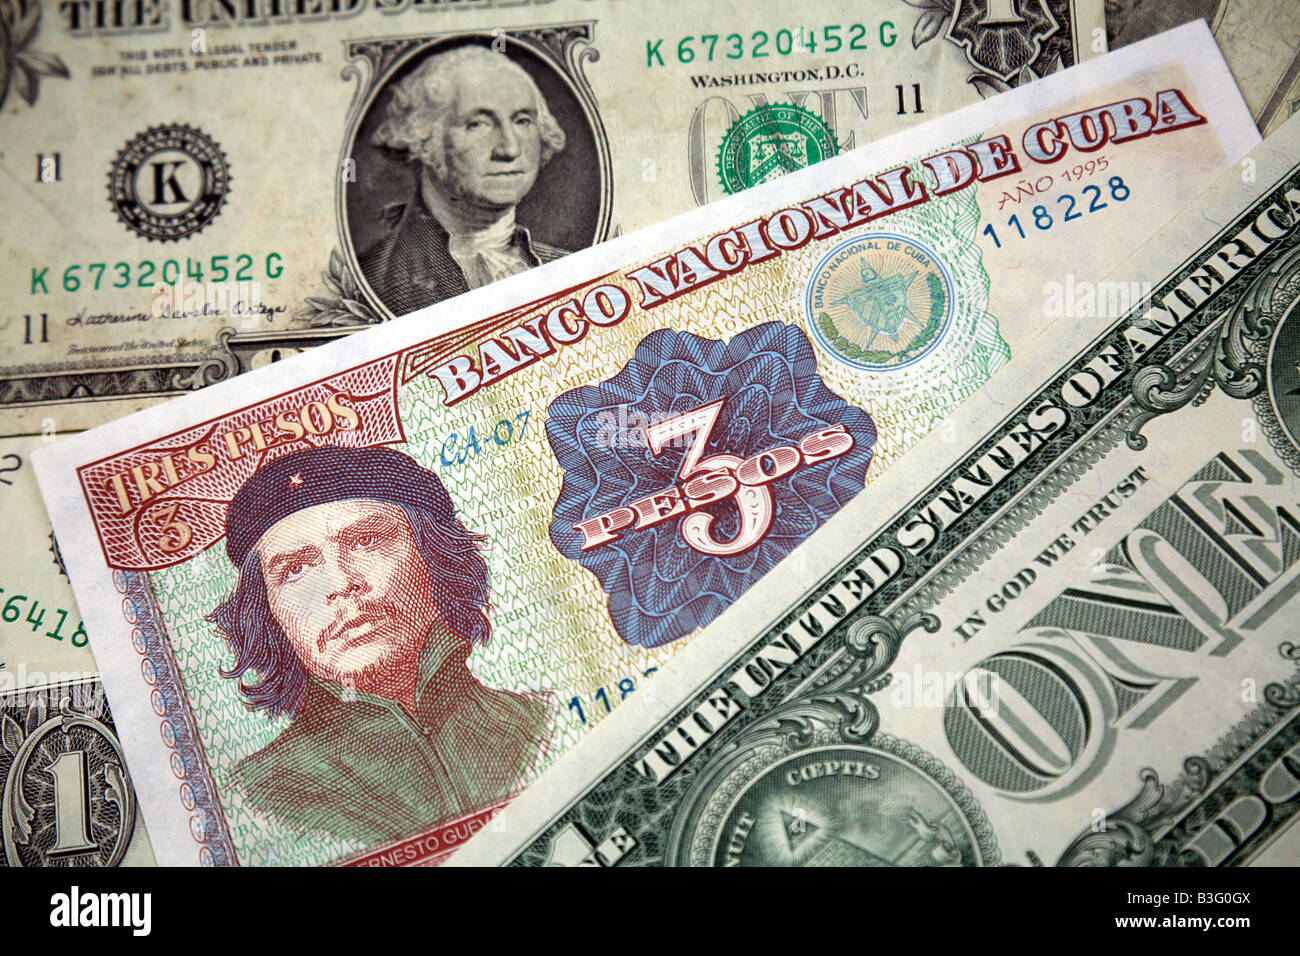 Che Guevara on a Cuban banknote with United States Dollars Stock Photo